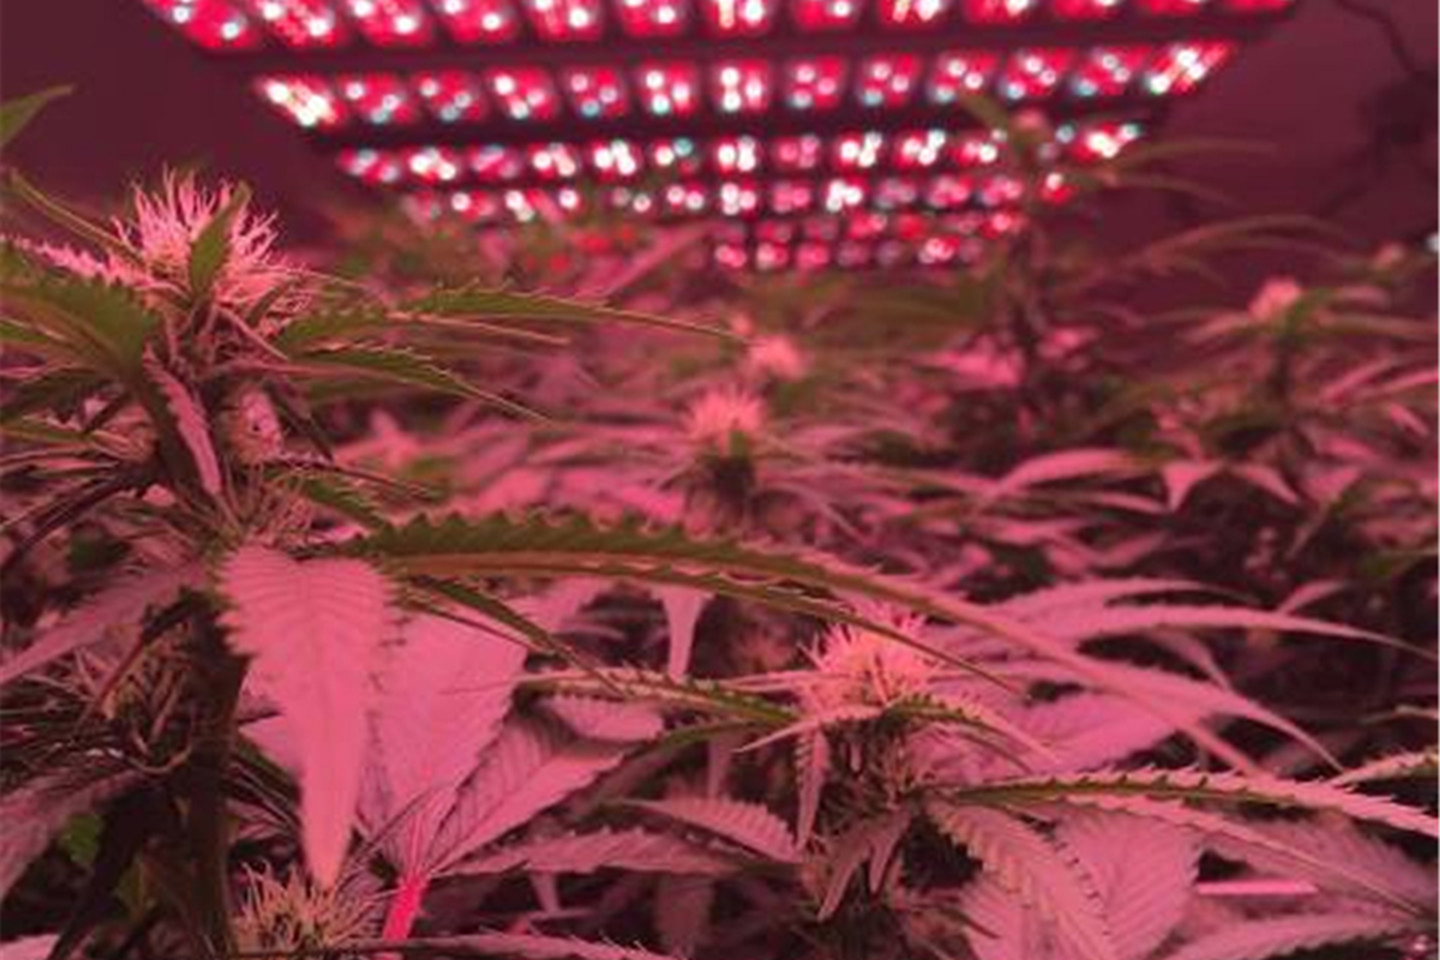 Innovation of UV LED Technology in Industrial Cannabis Production